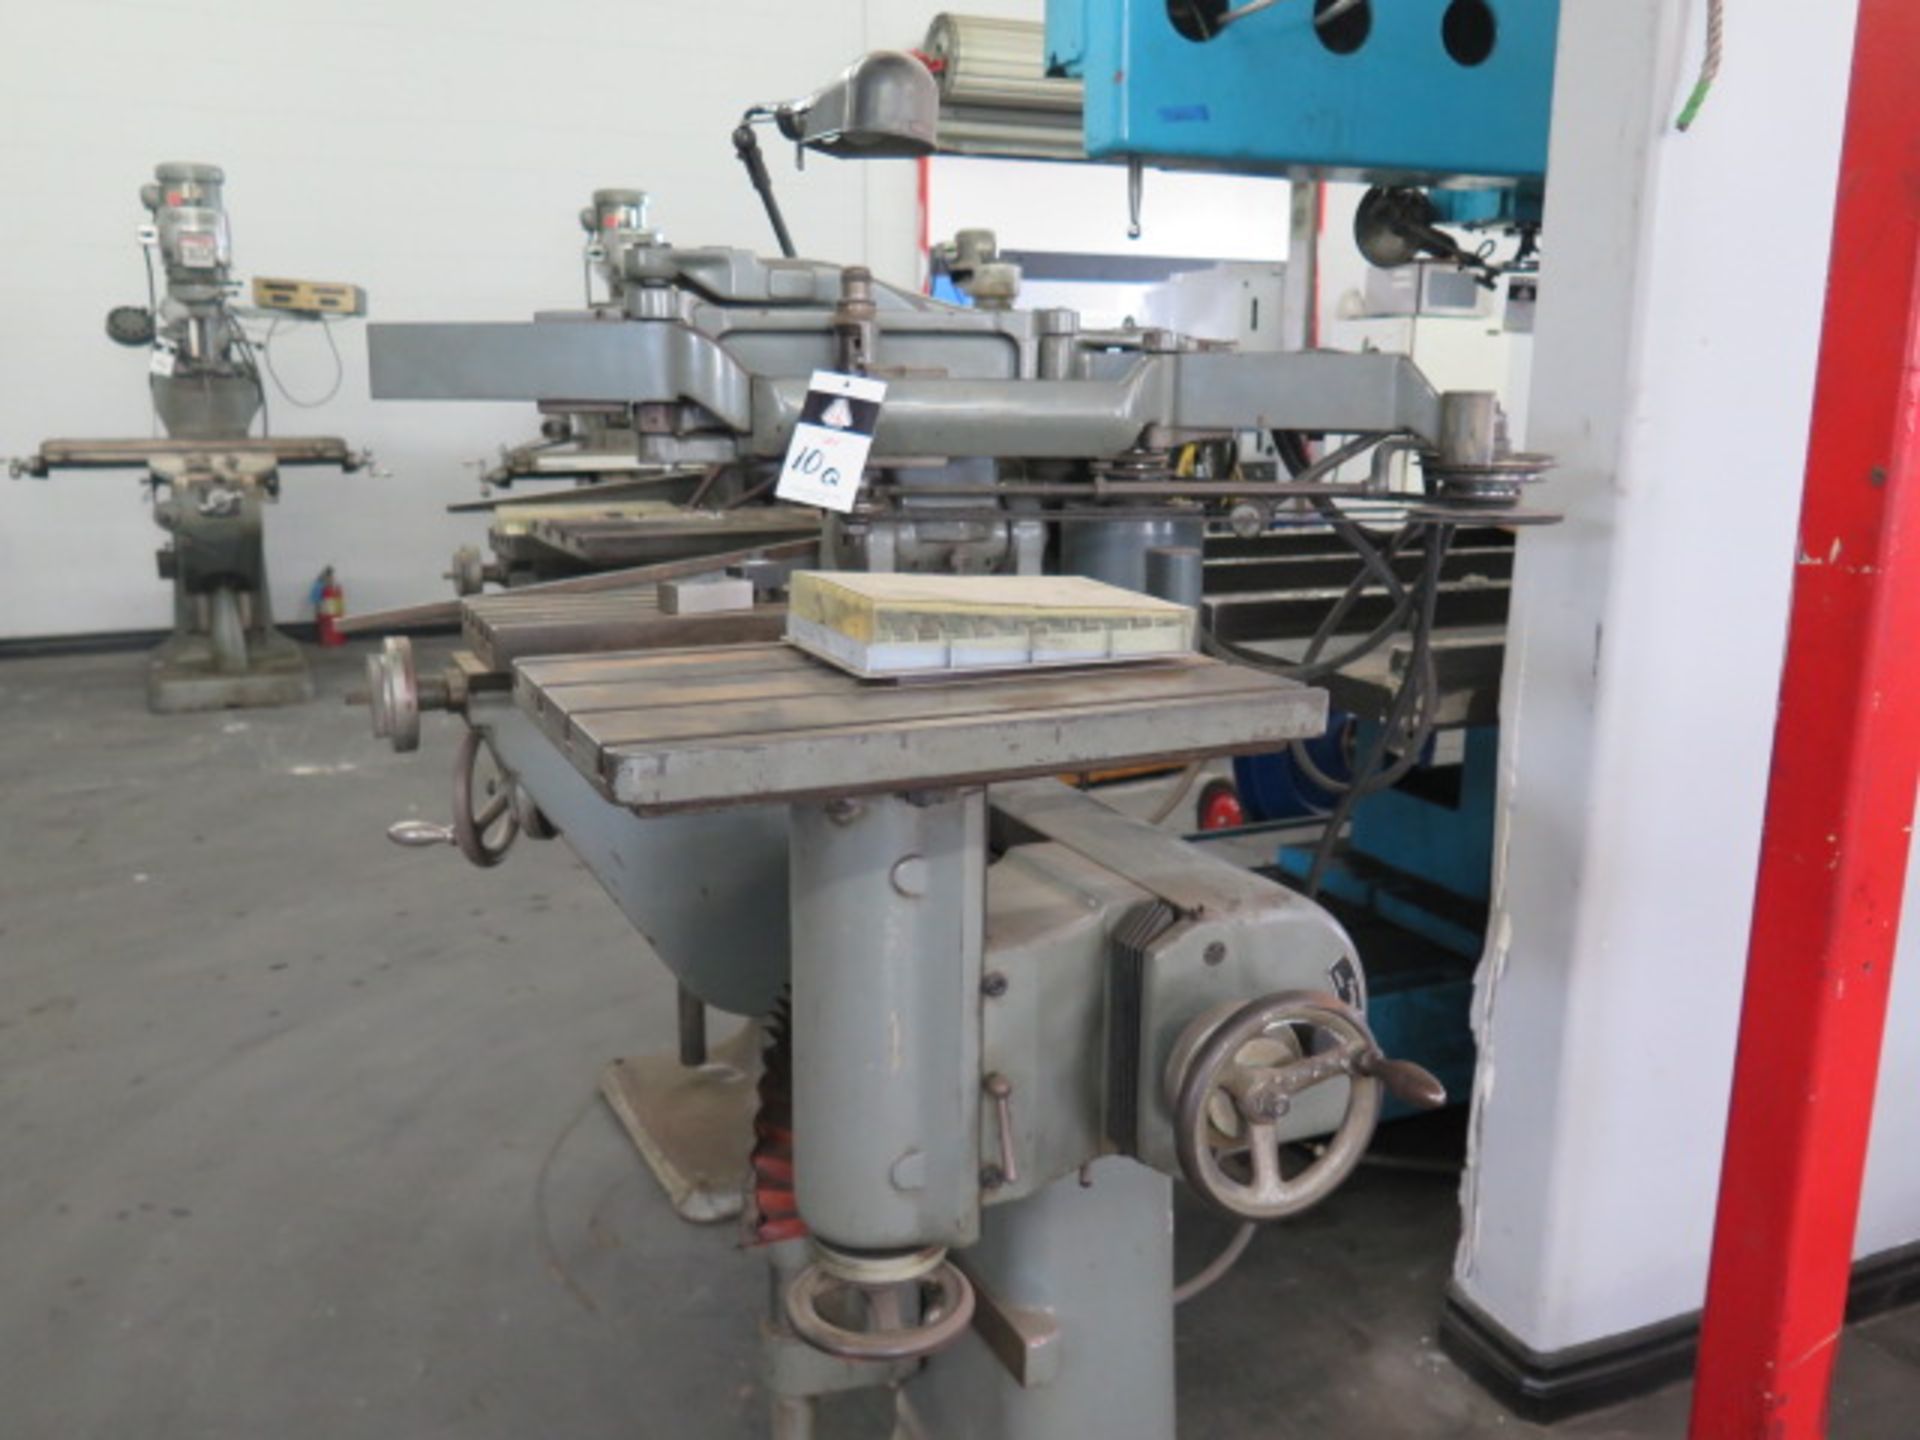 Deckel mdl. GK 21 Pantograph Machine s/n 56079 w/ 475-9500 RPM (SOLD AS-IS - NO WARRANTY) - Image 3 of 8